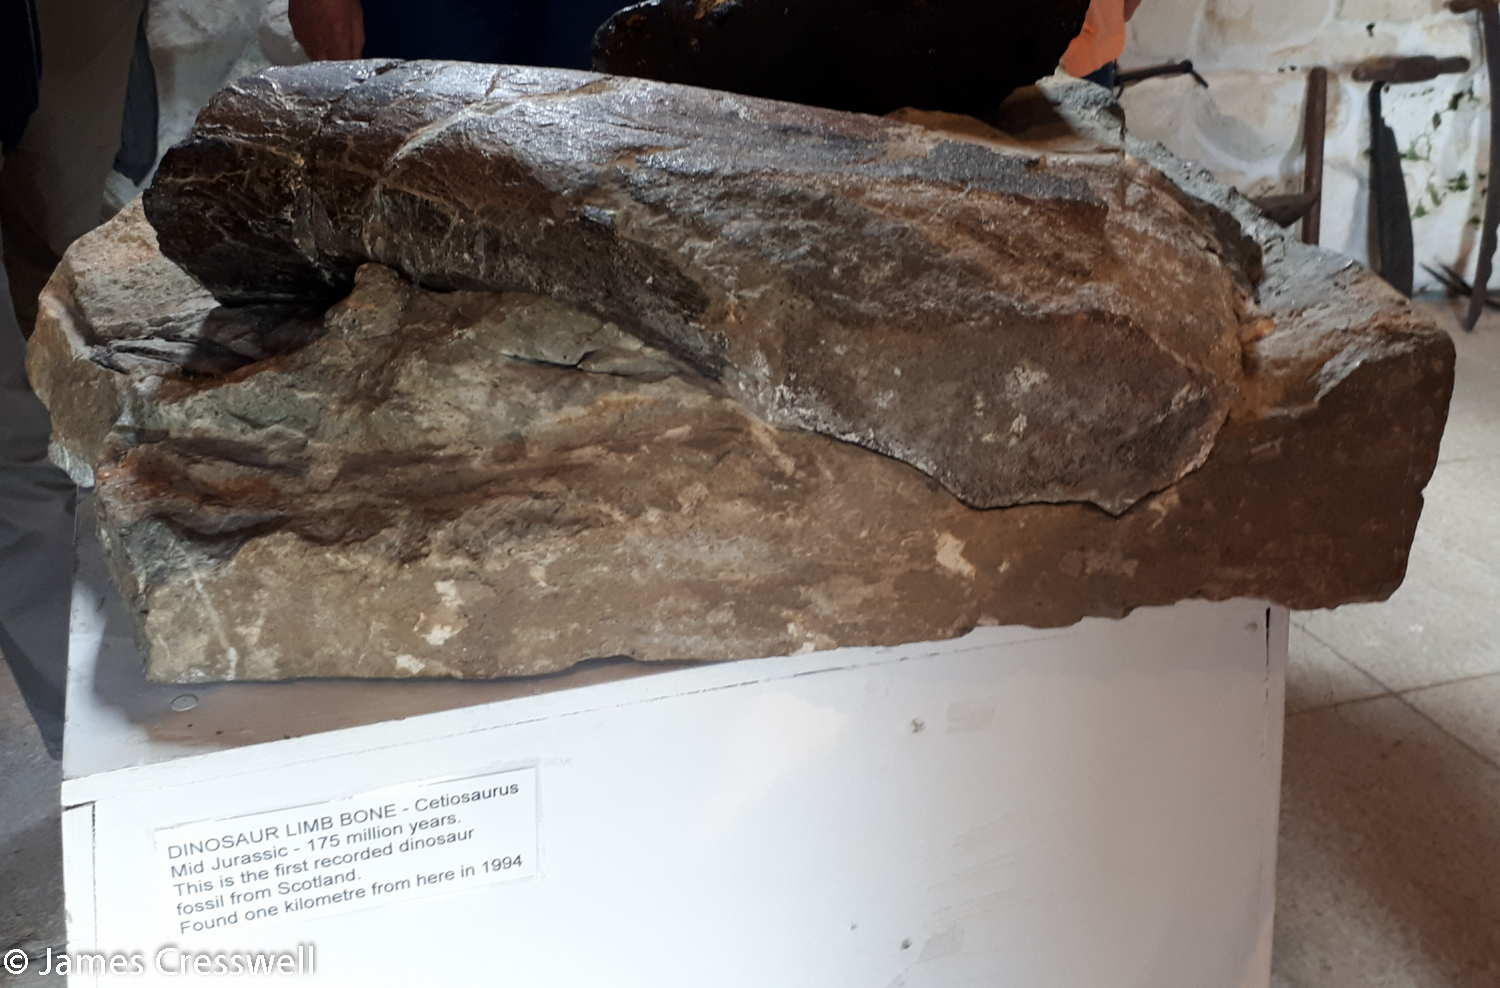 The first recorded dinosaur fossil from Scotland